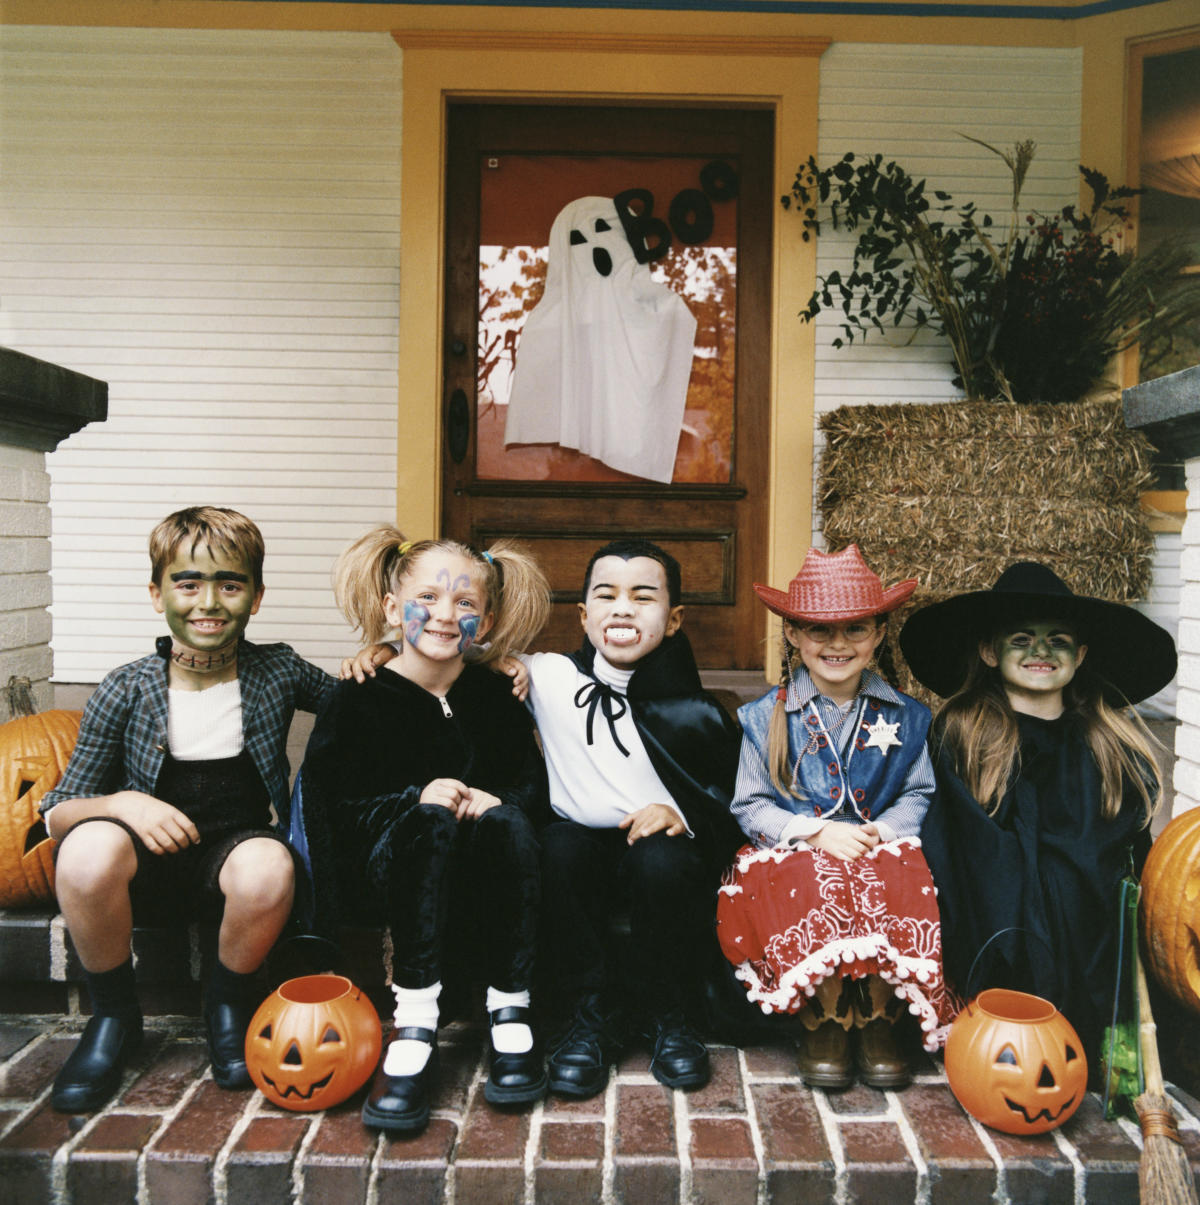 Trick or Treat Times for Halloween 2022 When Does TrickorTreating Start